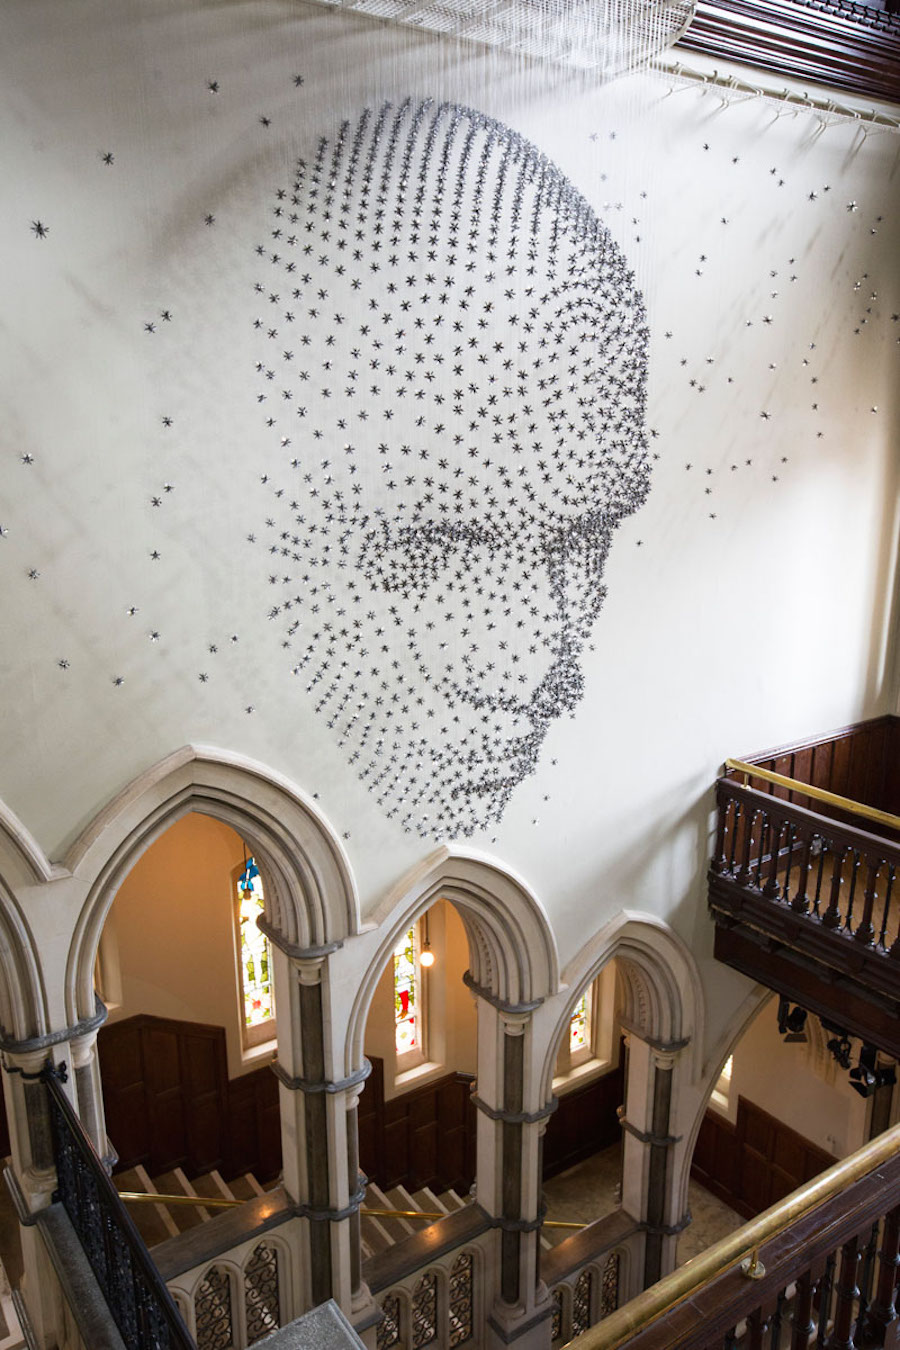 3D Face Installation Made With Metal Stars2